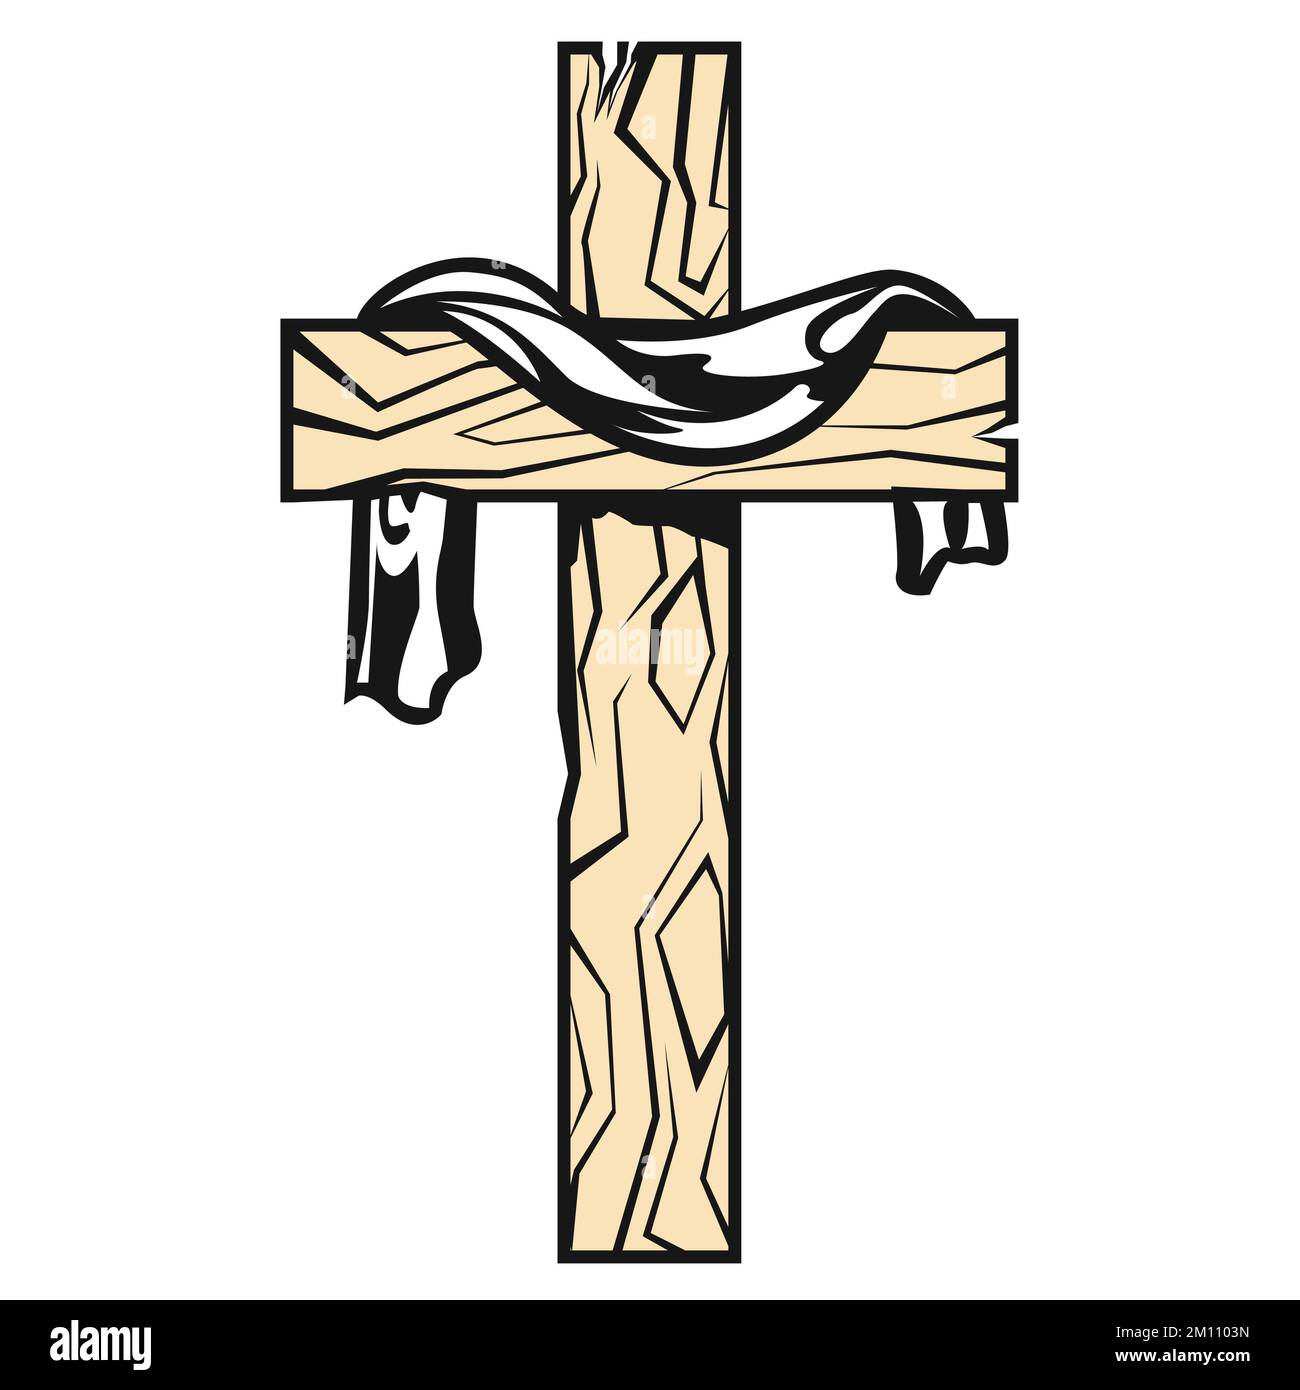 Cross with fabric on it, resurrection after crucifixion of Jesus, christianity symbol, vector Stock Vector